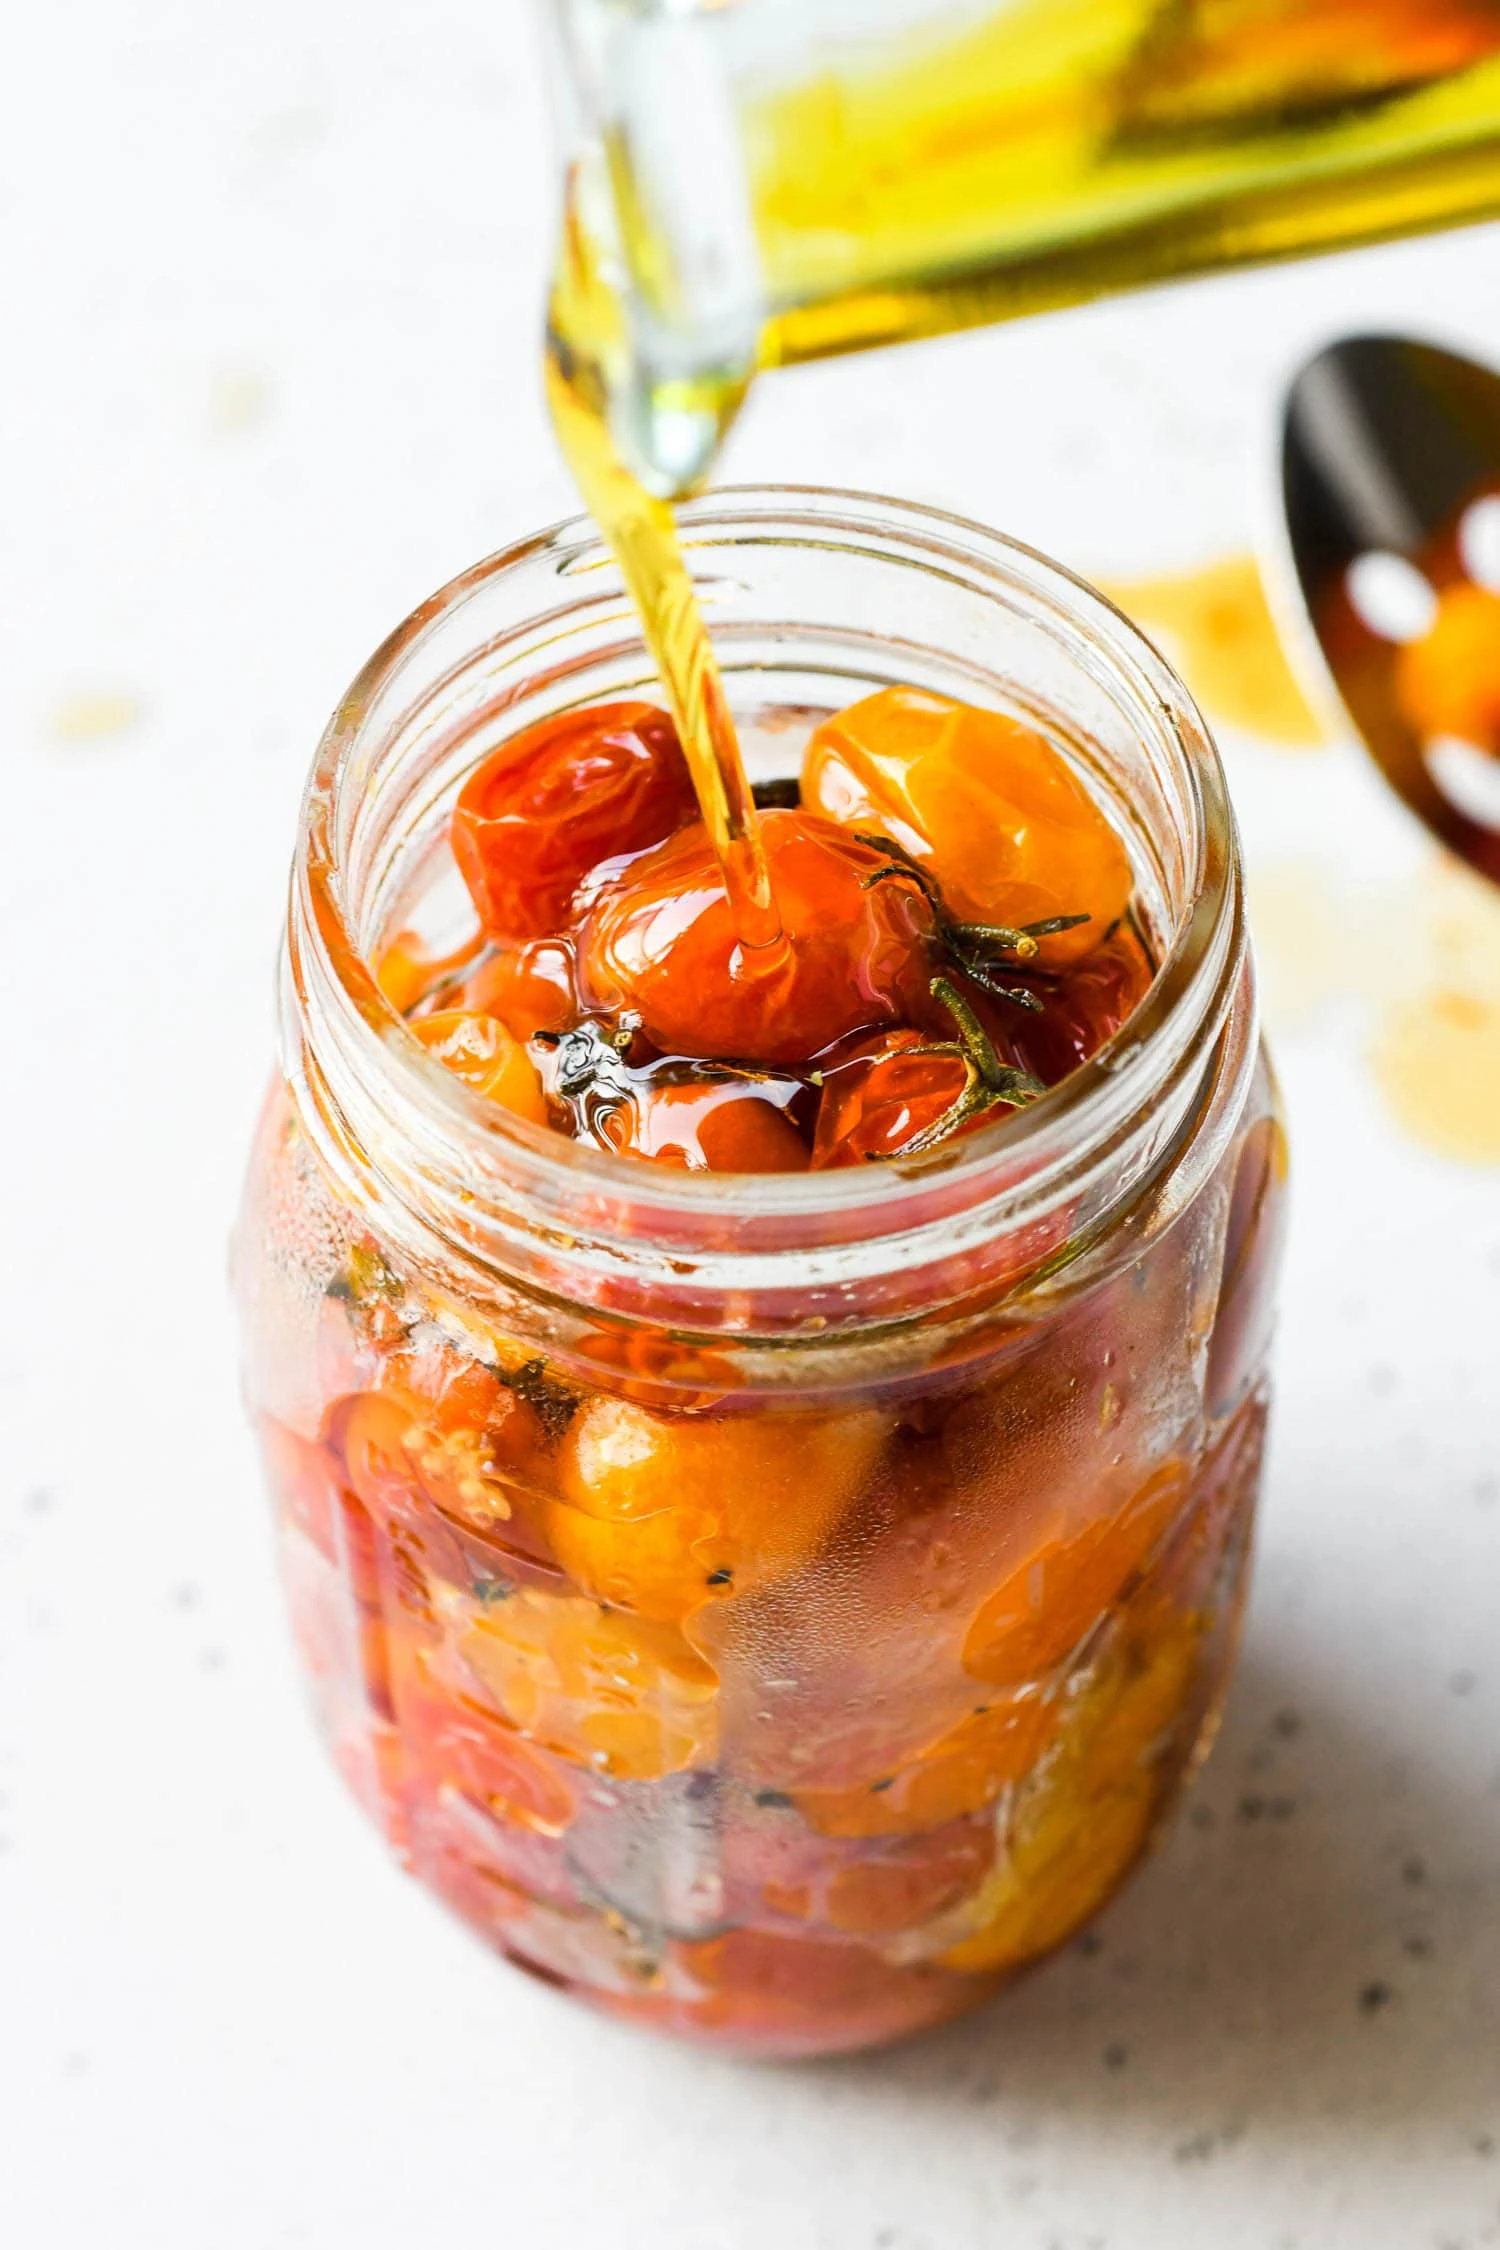 pouring olive oil onto cherry tomatoes